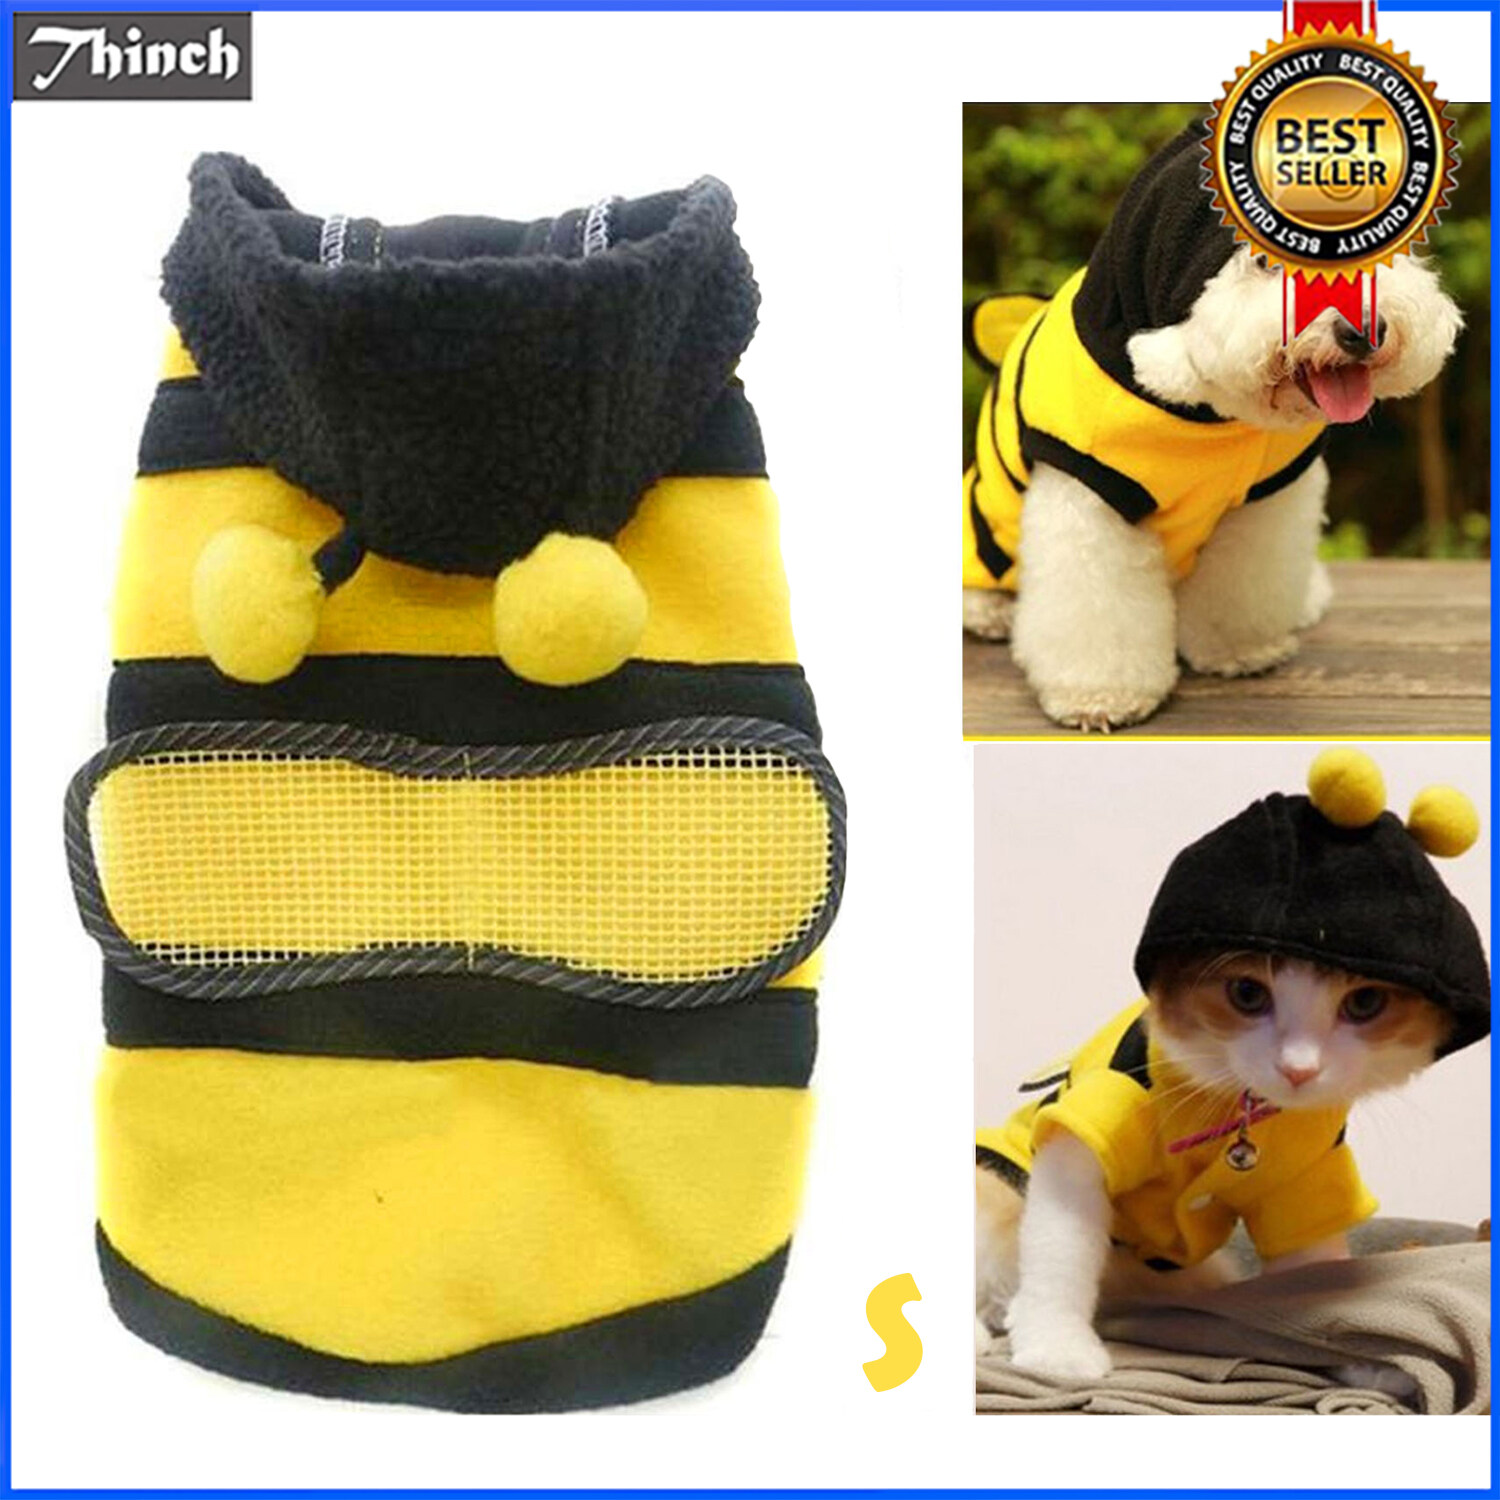 Cute Bee Design Pet Dog Polar Fleece Cloth Clothing Cat Clothes Puppy Hoodie Plush Warm Winter Coat Apparel Costume Accessory for Dogs Pets with Hat Size S